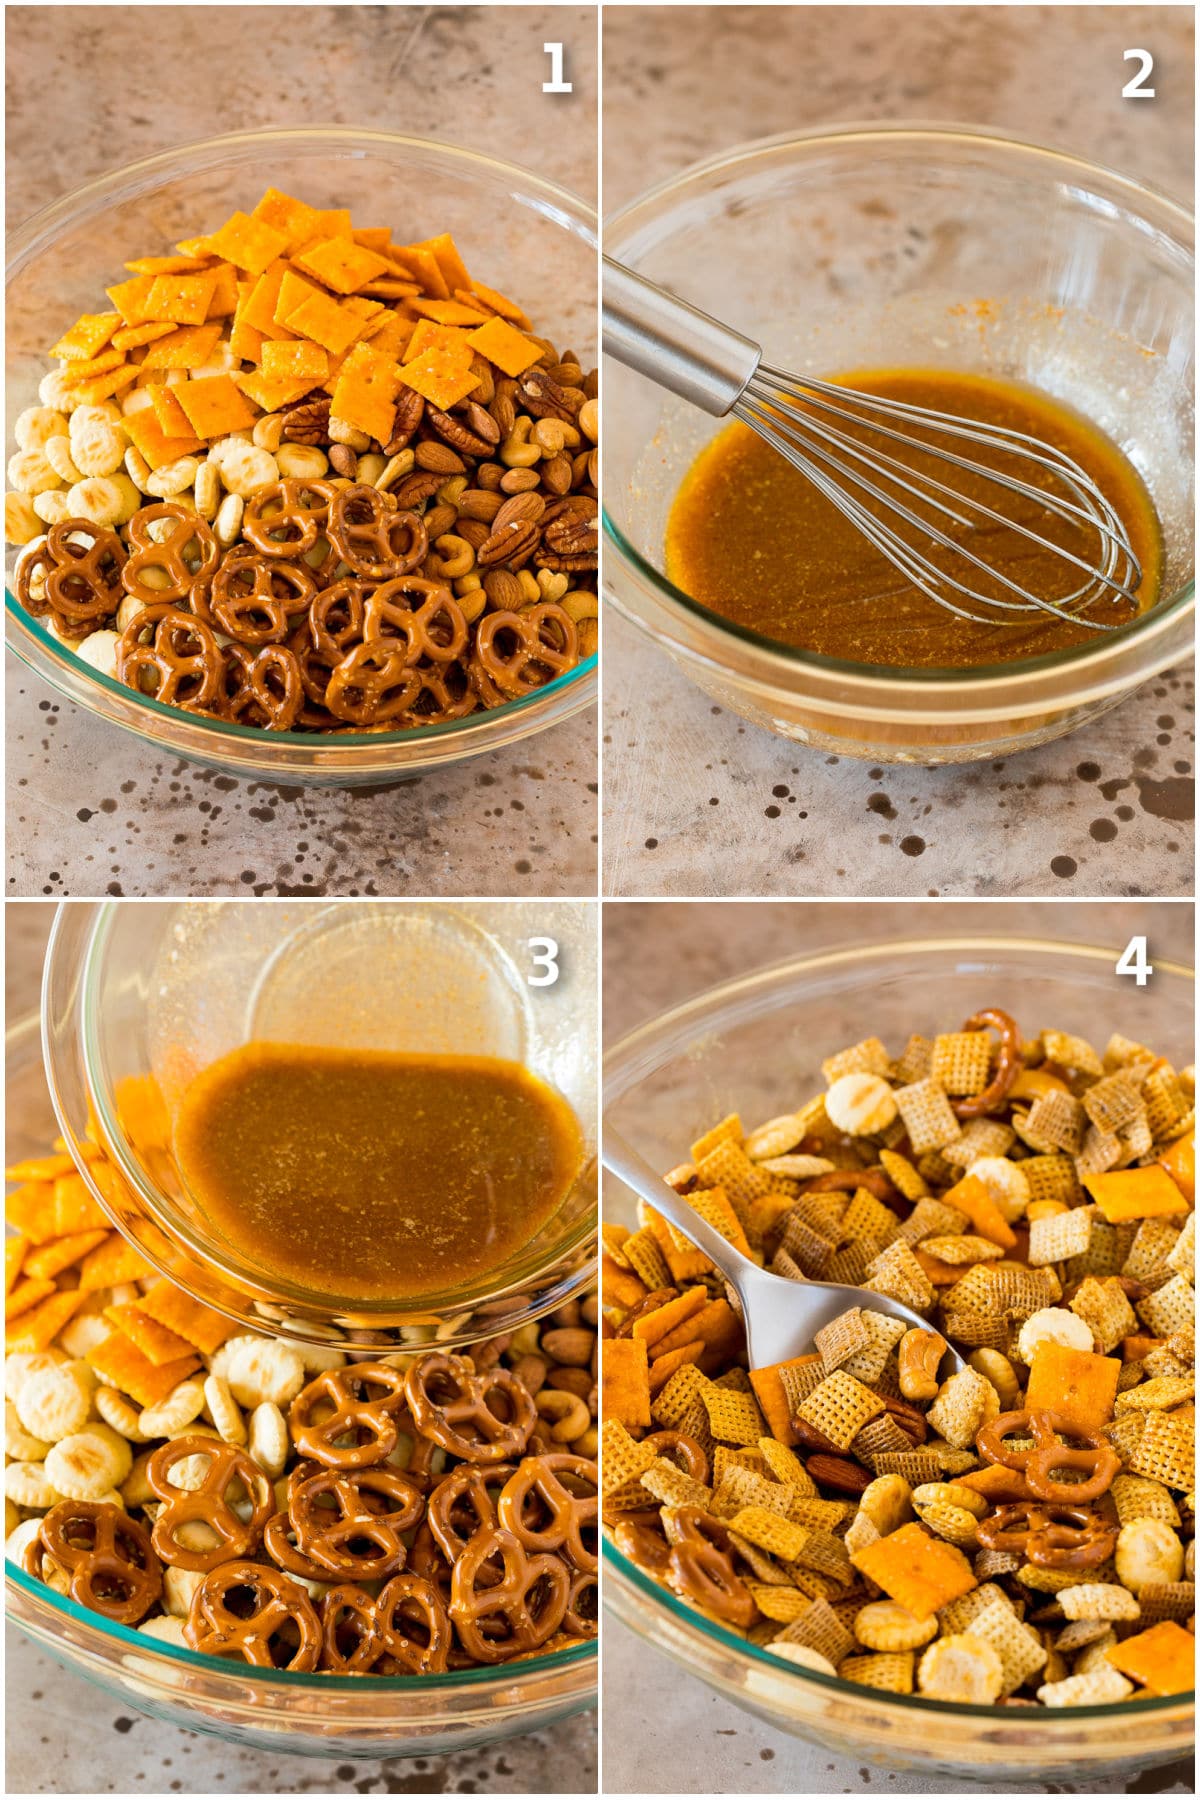 Step by step process shots showing how to make Chex mix.